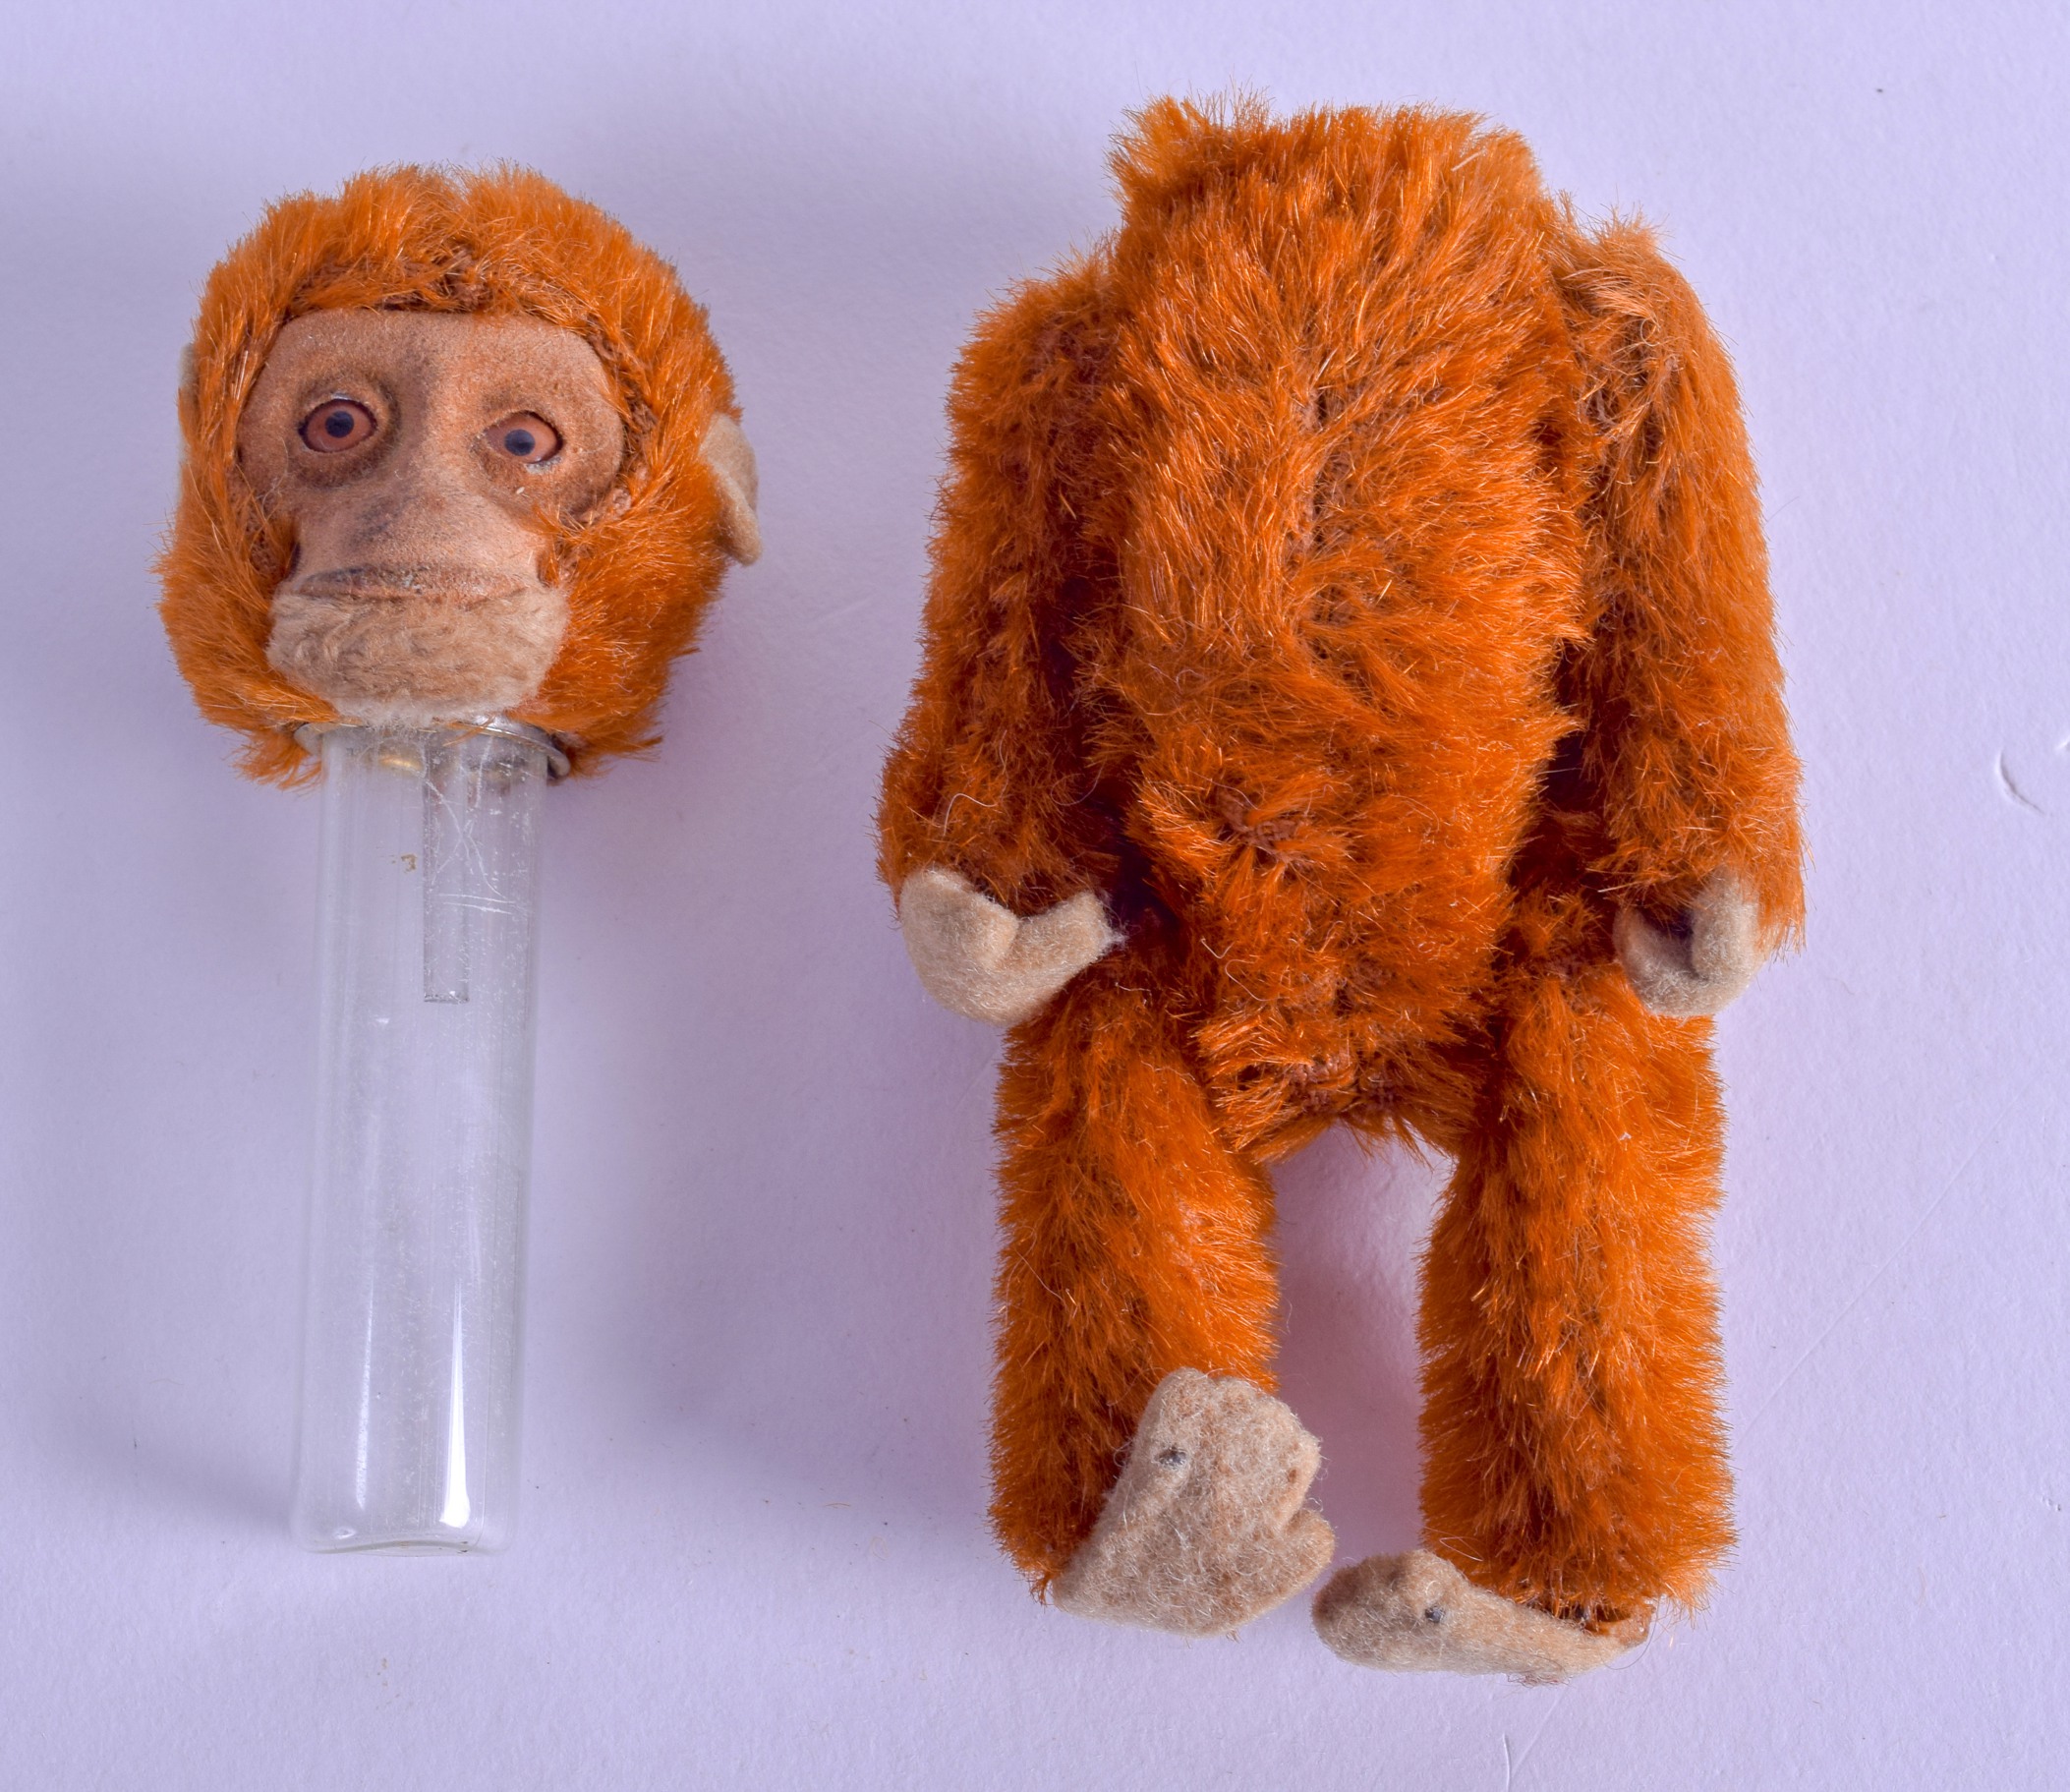 A RARE SCHUCO SCENT BOTTLE AND STOPPER unusually in the form of a red monkey. 11.75 cm high. - Image 3 of 3